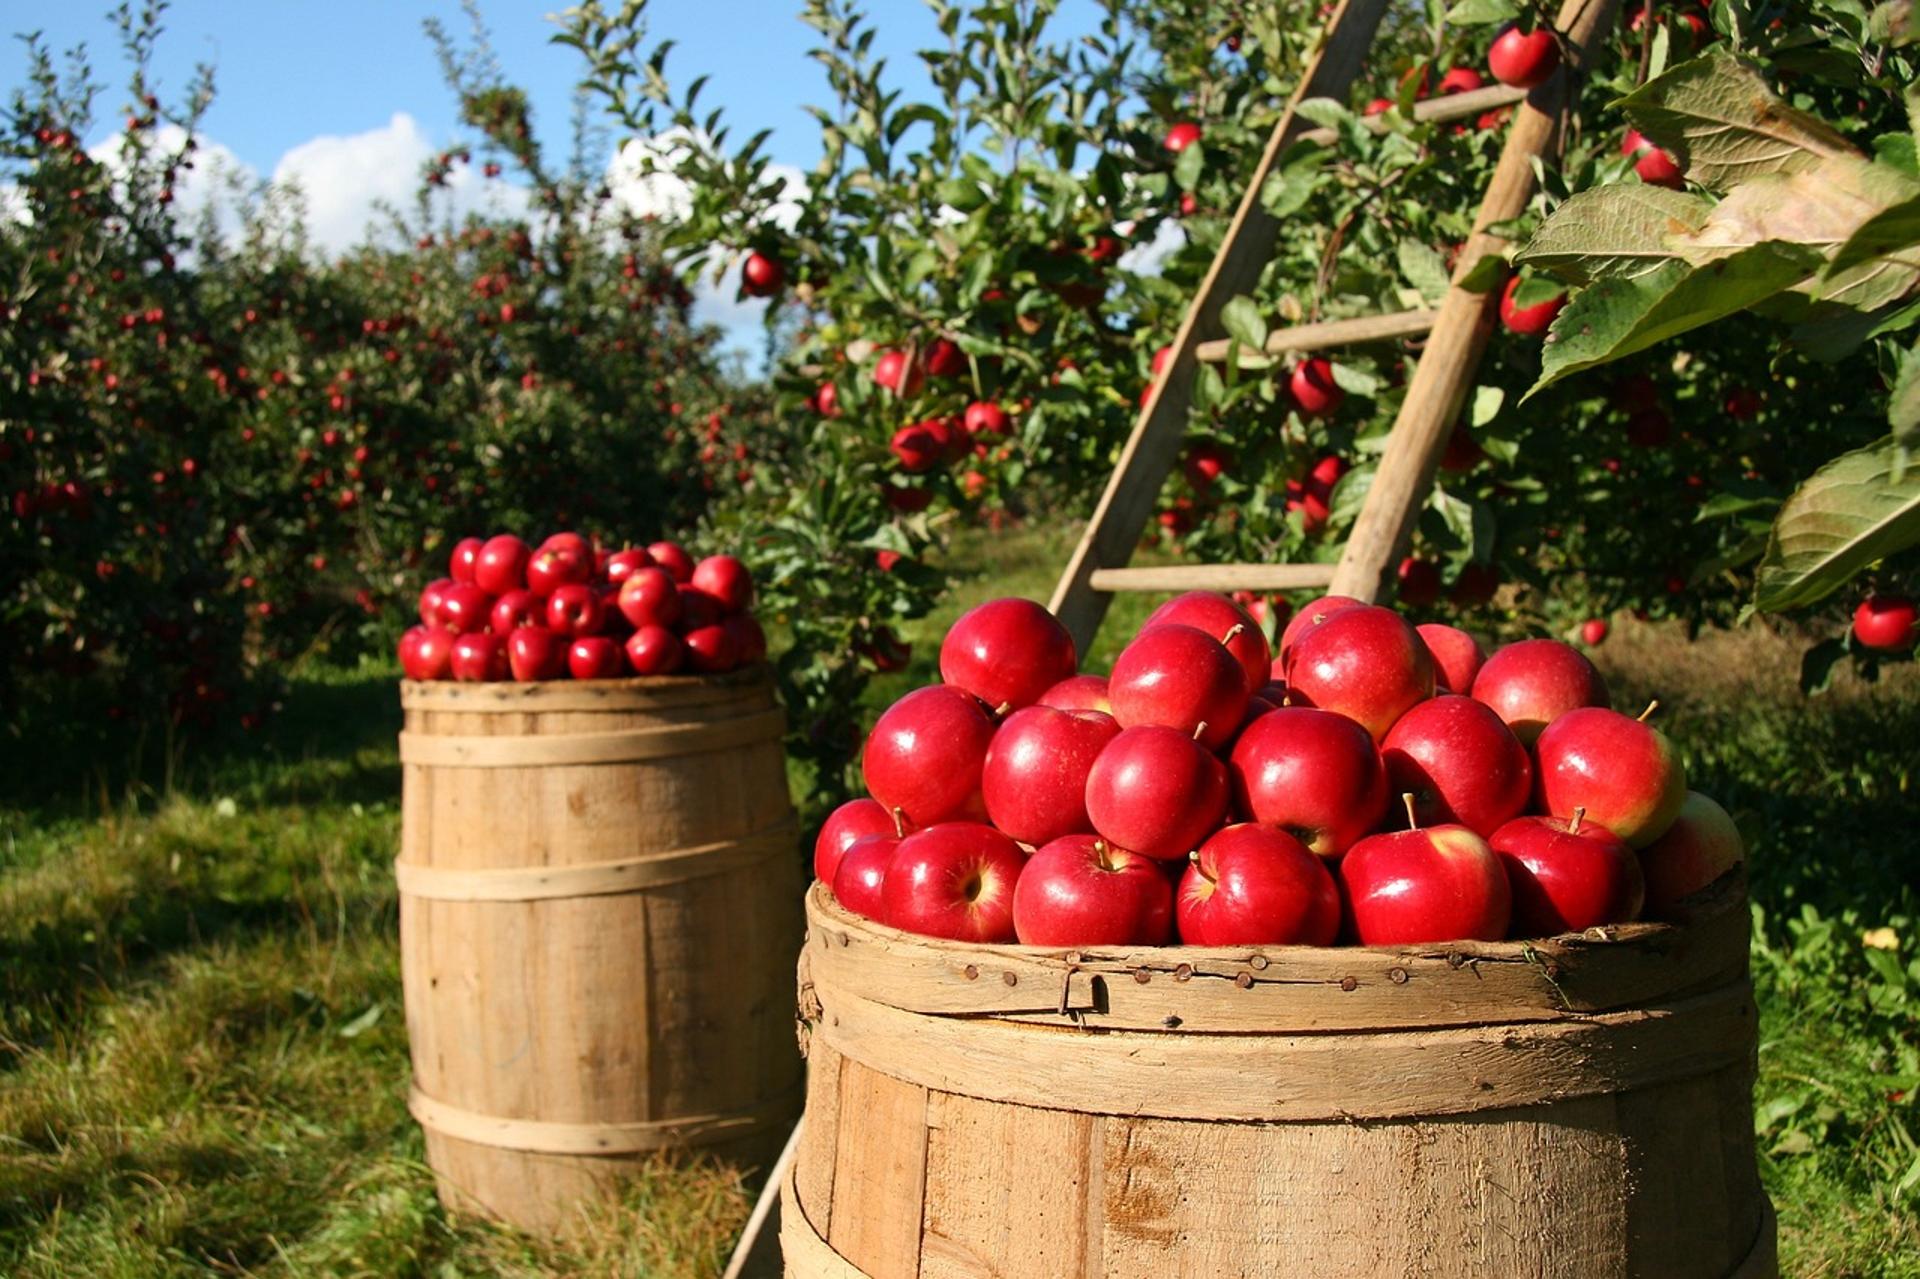 Two bushels of apples in an orchard